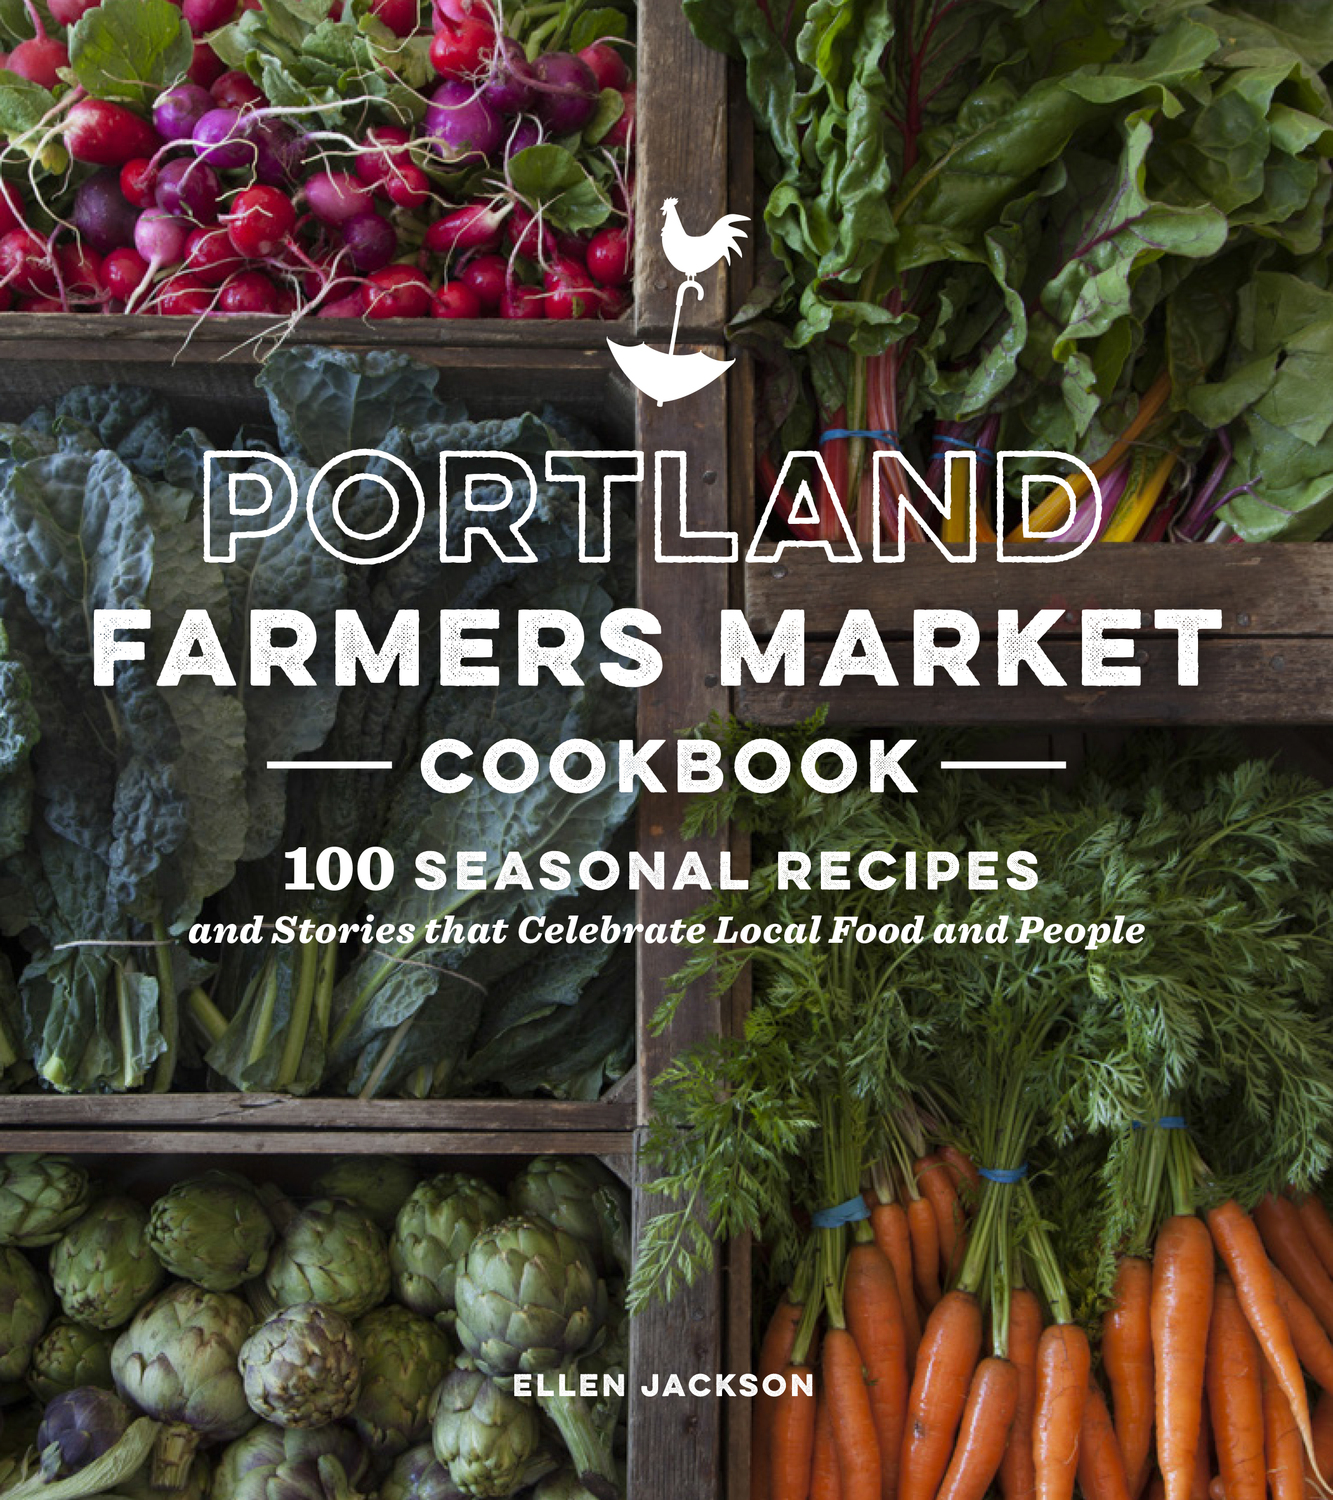 Portland Farmers Market cookbook 100 seasonal recipes and stories that celebrate local food and people - photo 1